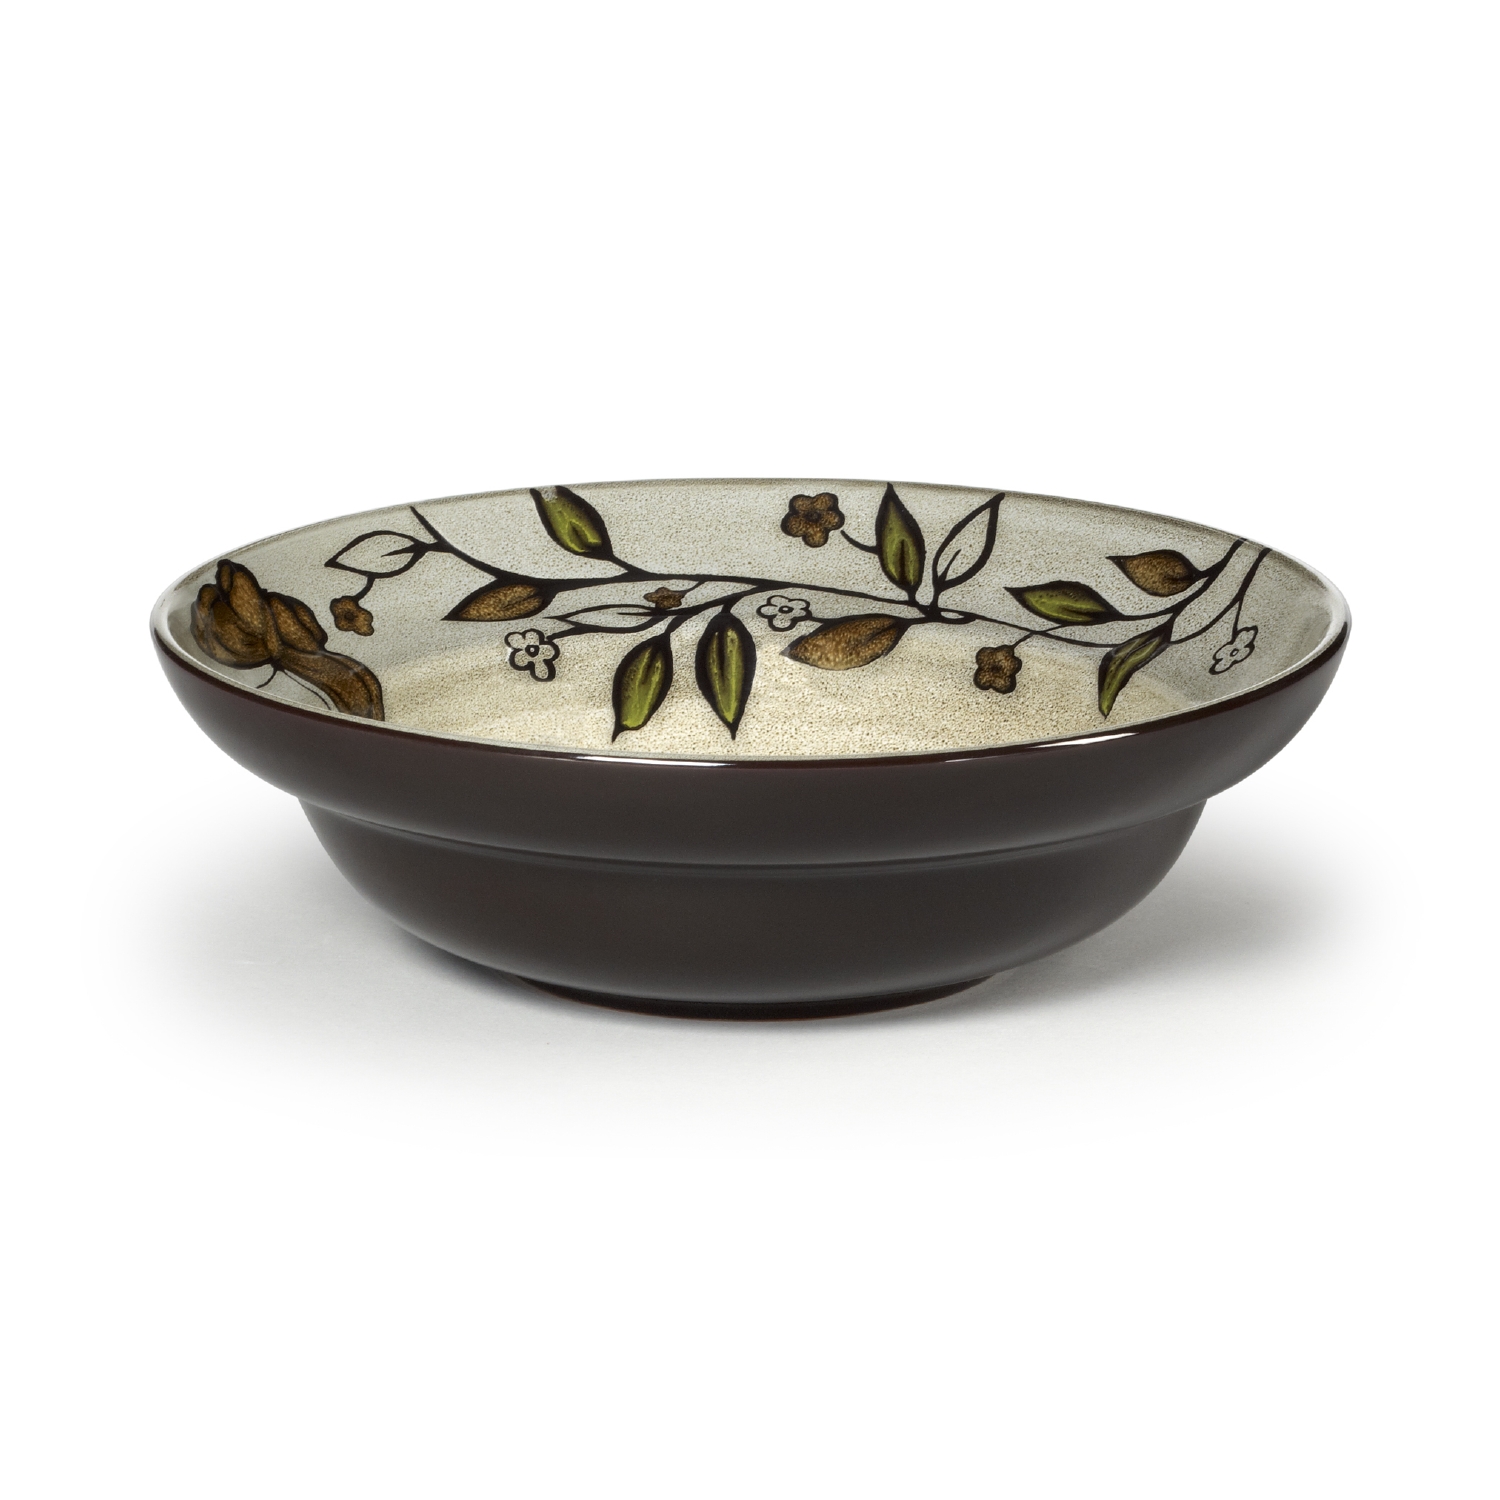 Pfaltzgraff Everyday Rustic Leaves 9.5" Vegetable Bowl - With Butterfly